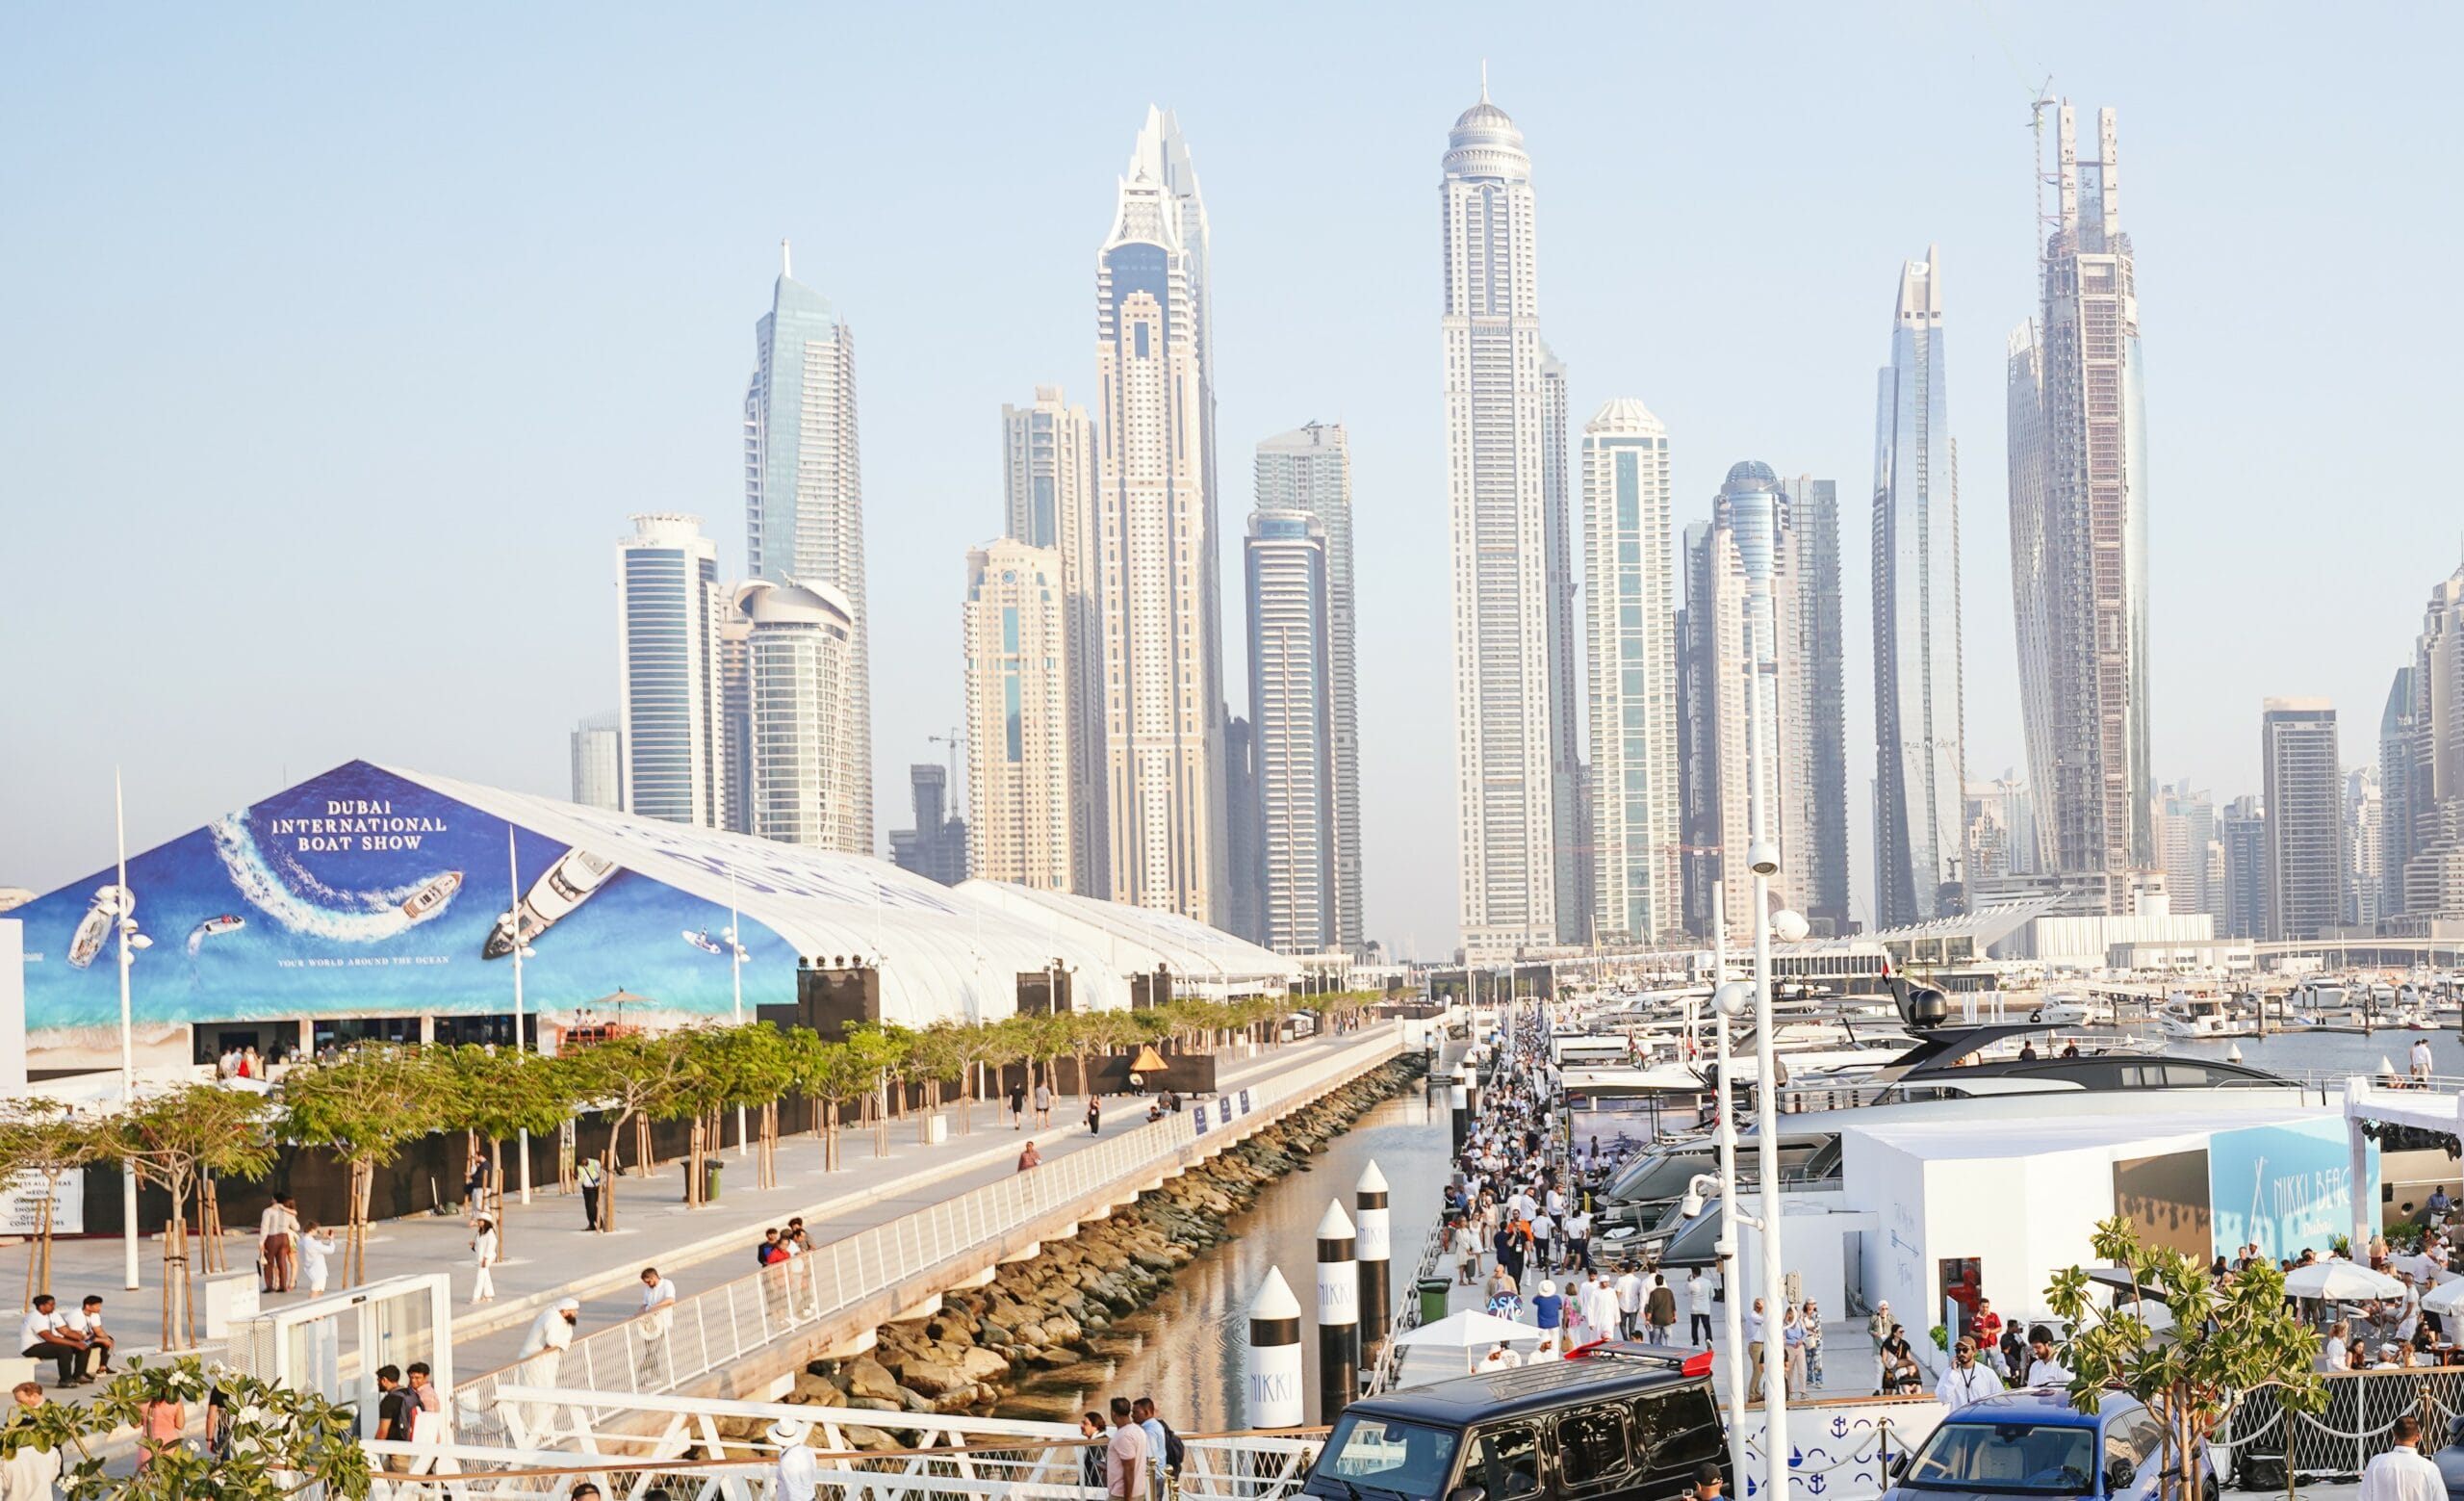 DUBAI INTERNATIONAL BOAT SHOW 2024 TO CONVERGE THE WORLD’S LEISURE YACHTING INDUSTRY FOR LANDMARK 30TH EDITION